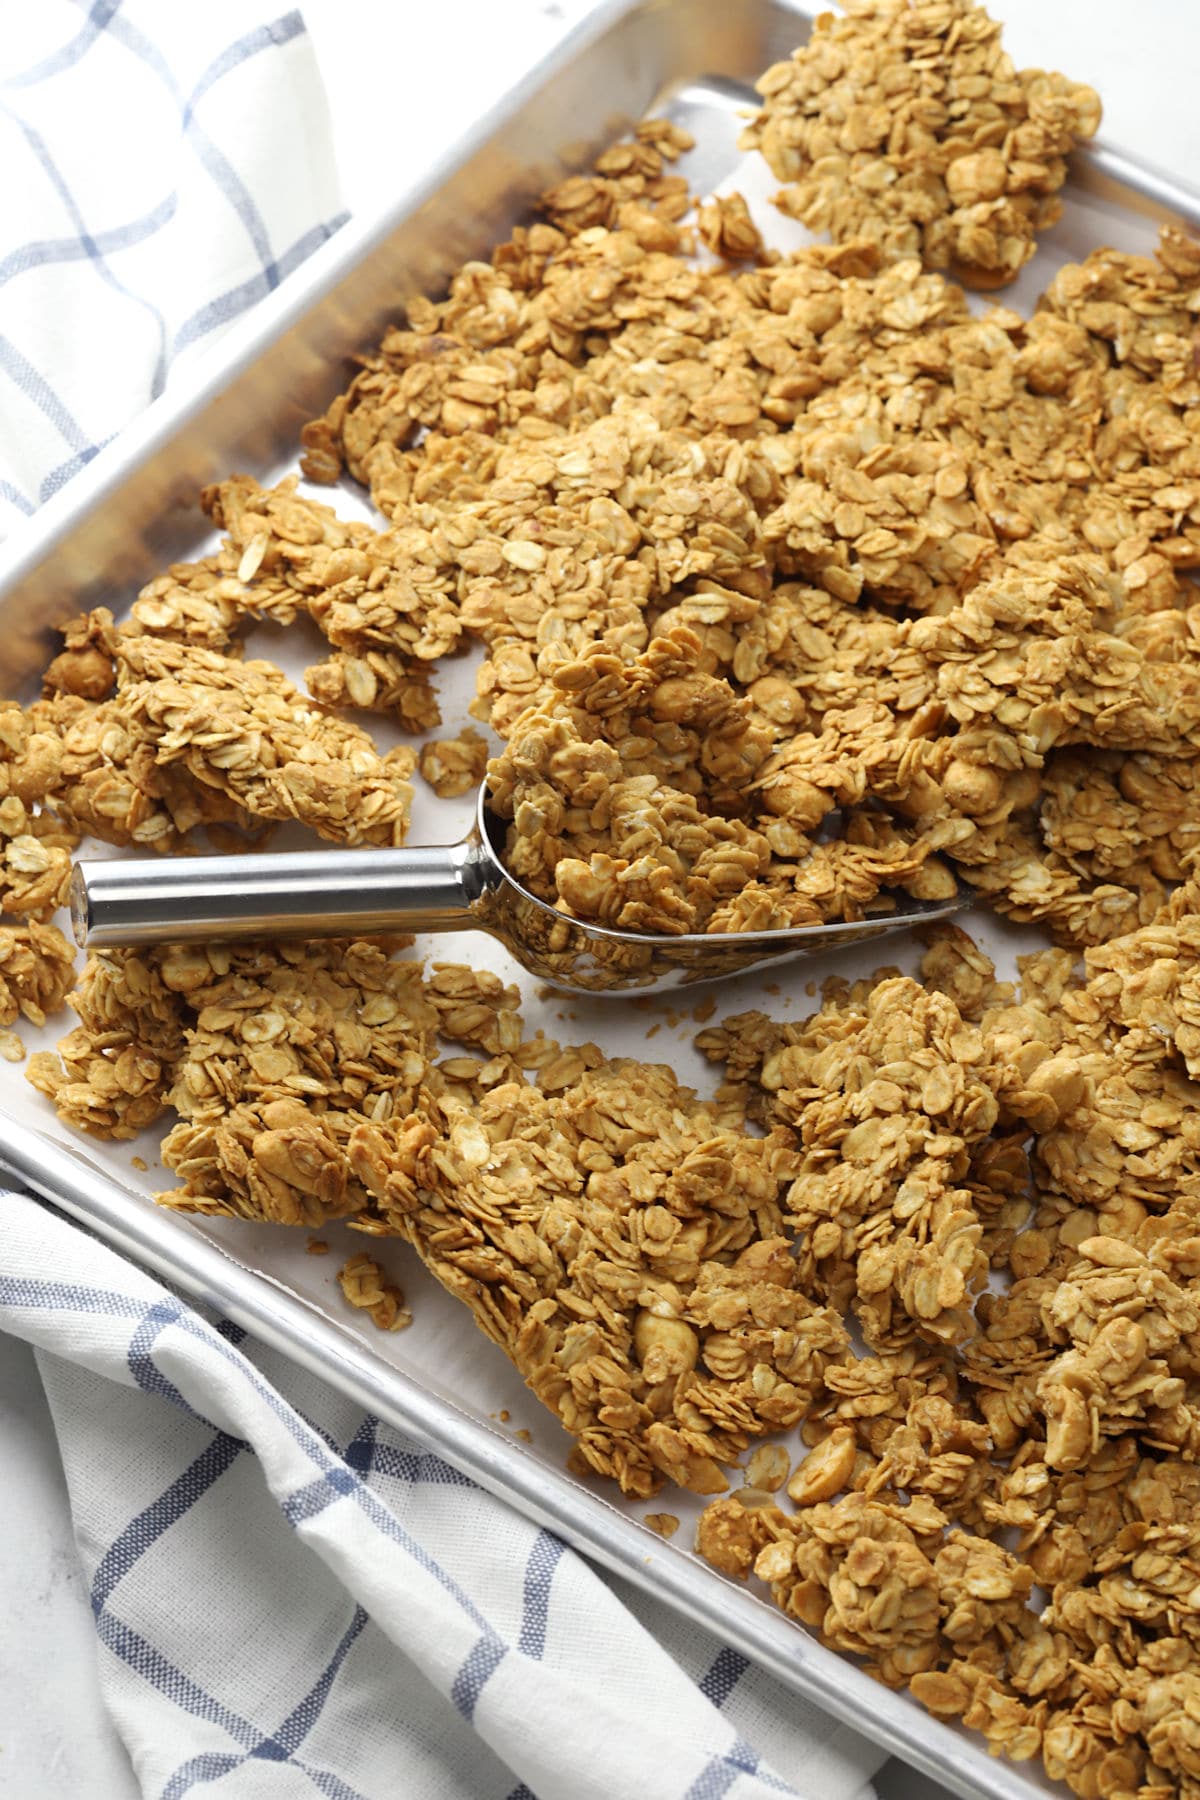 Metal sheet pan filled with peanut butter granola and a metal scoop.